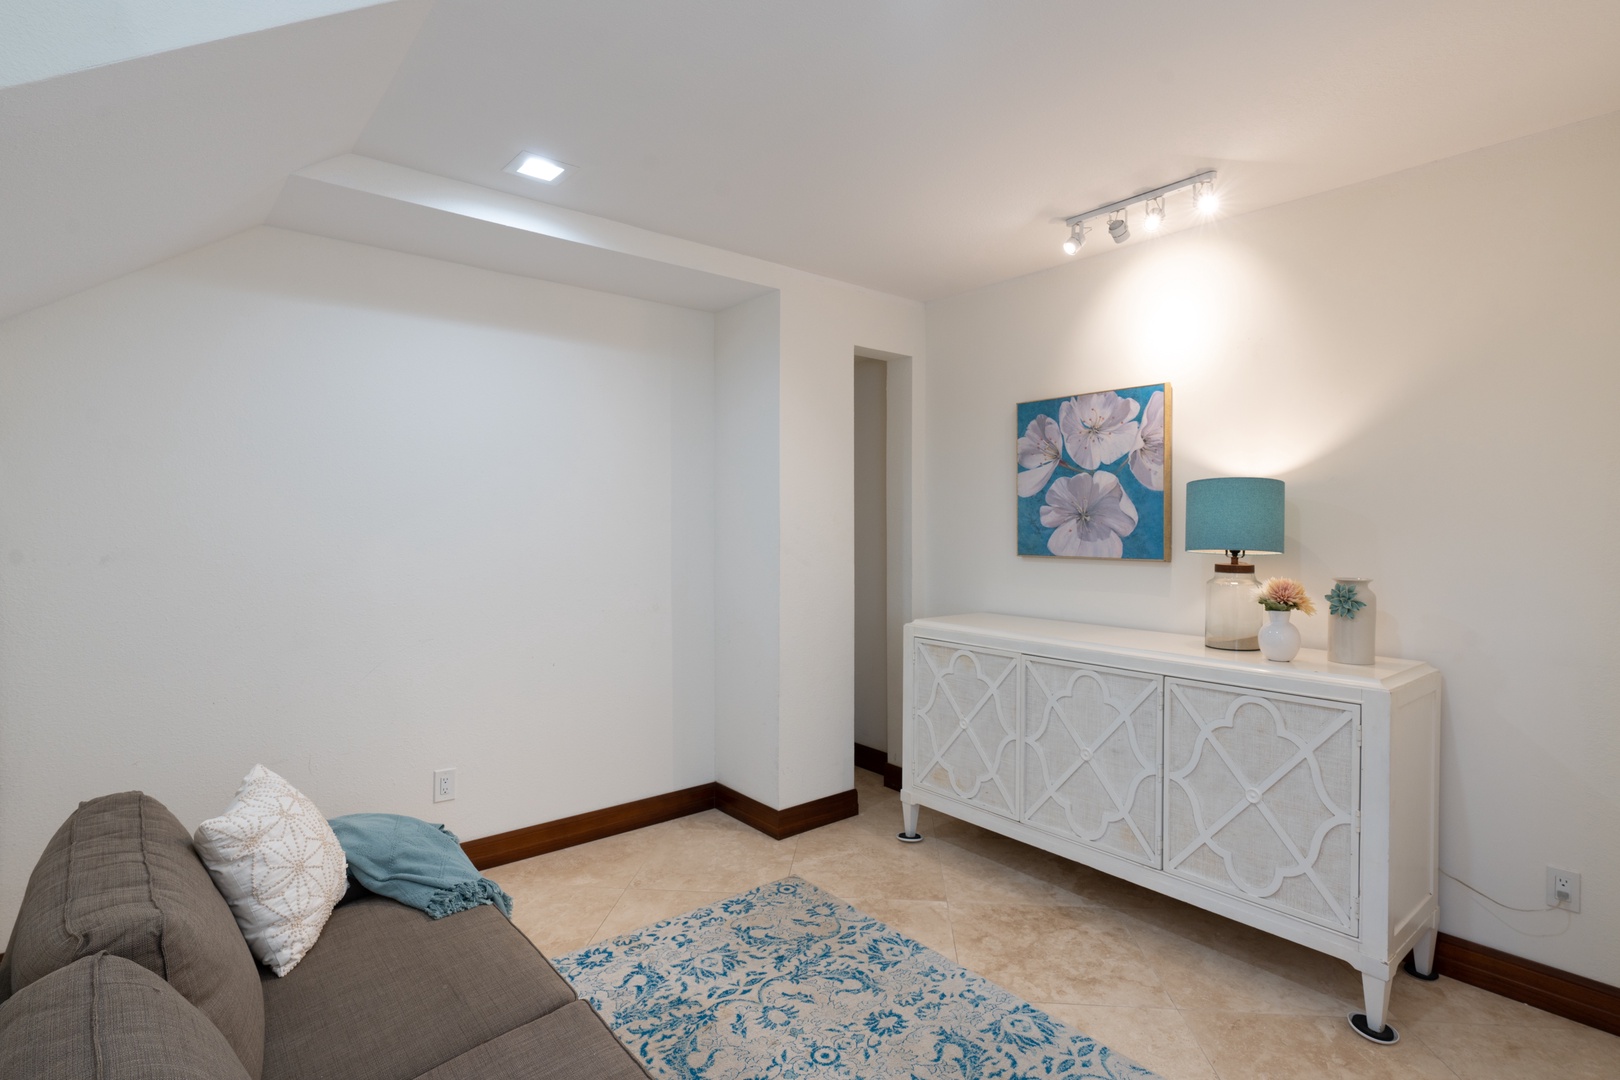 Honolulu Vacation Rentals, Wailupe Seaside - Guest suite on second floor, with sitting area and queen bed.